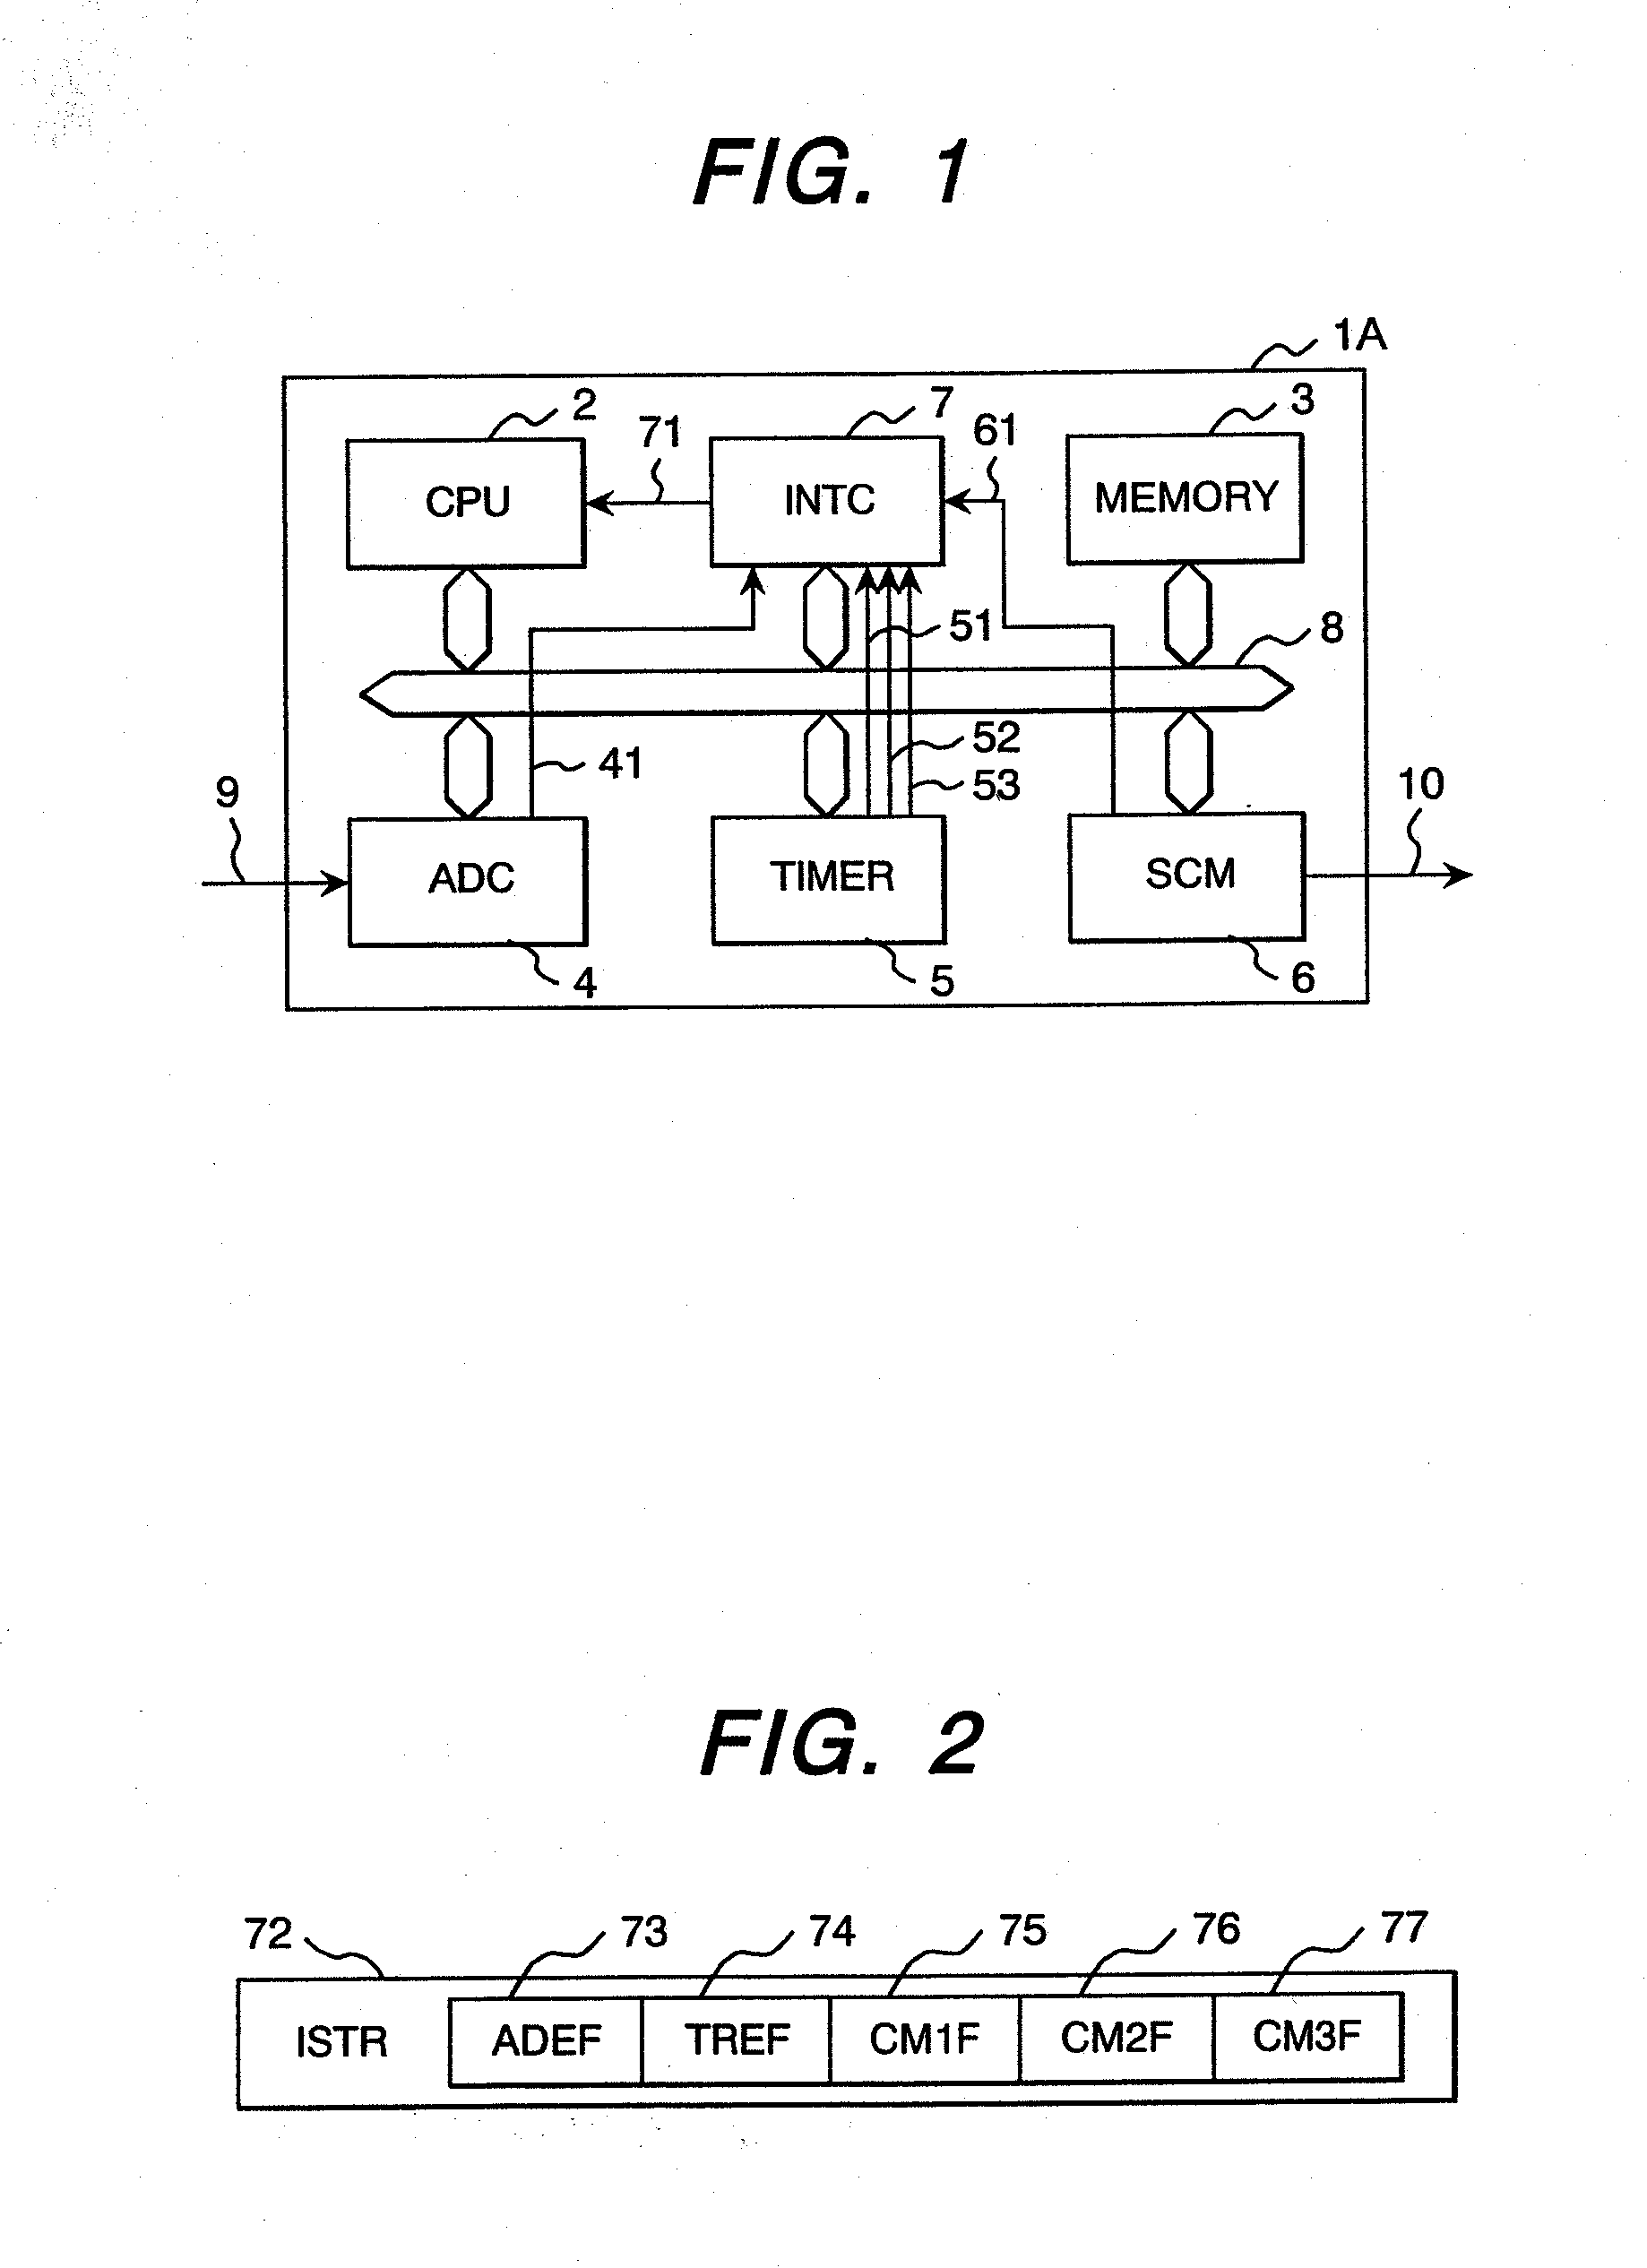 Electronic Controller for Power Converter and Motor Drive Circuit